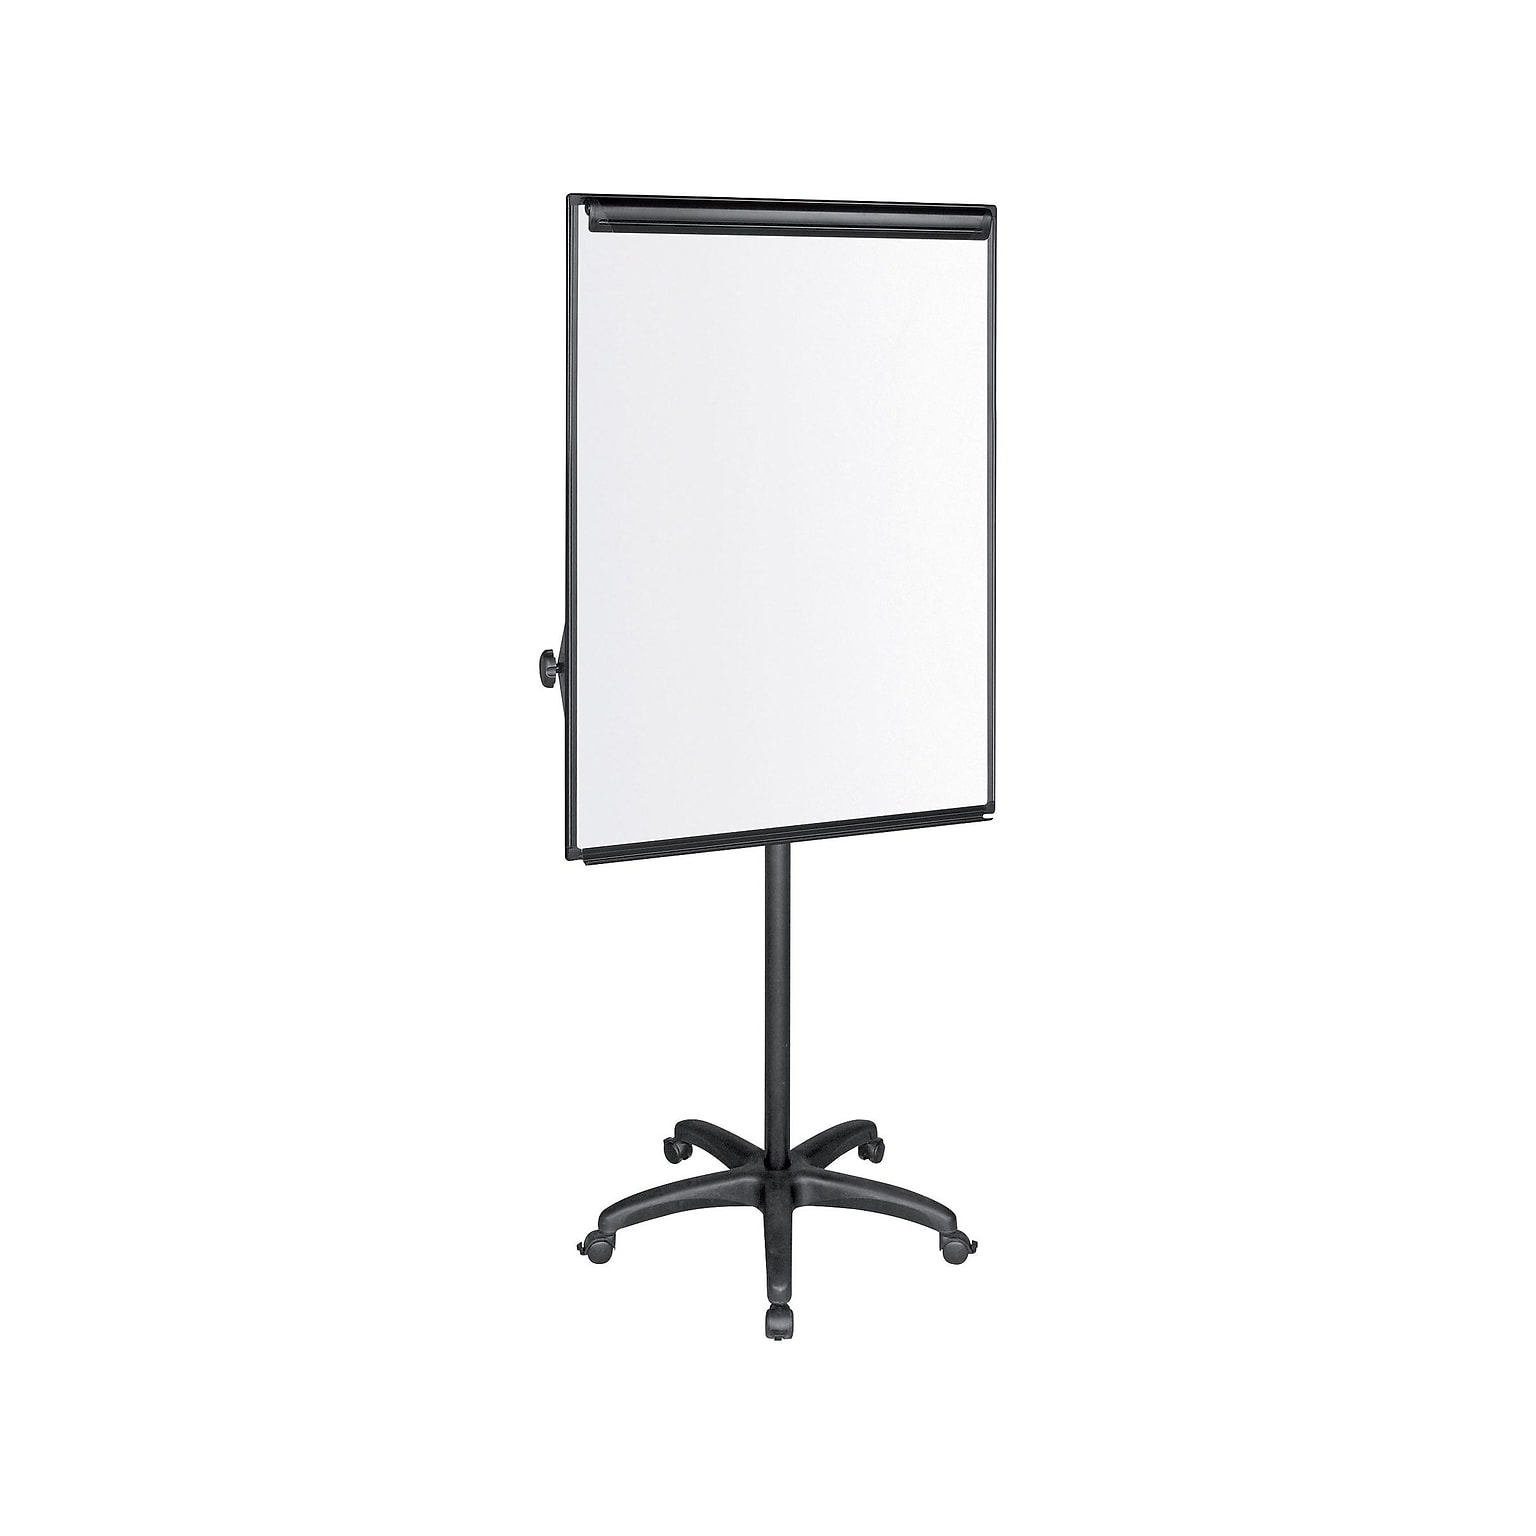 Quill Brand® Dry Erase Easel, 74.5, Black Steel (28833US/CC)